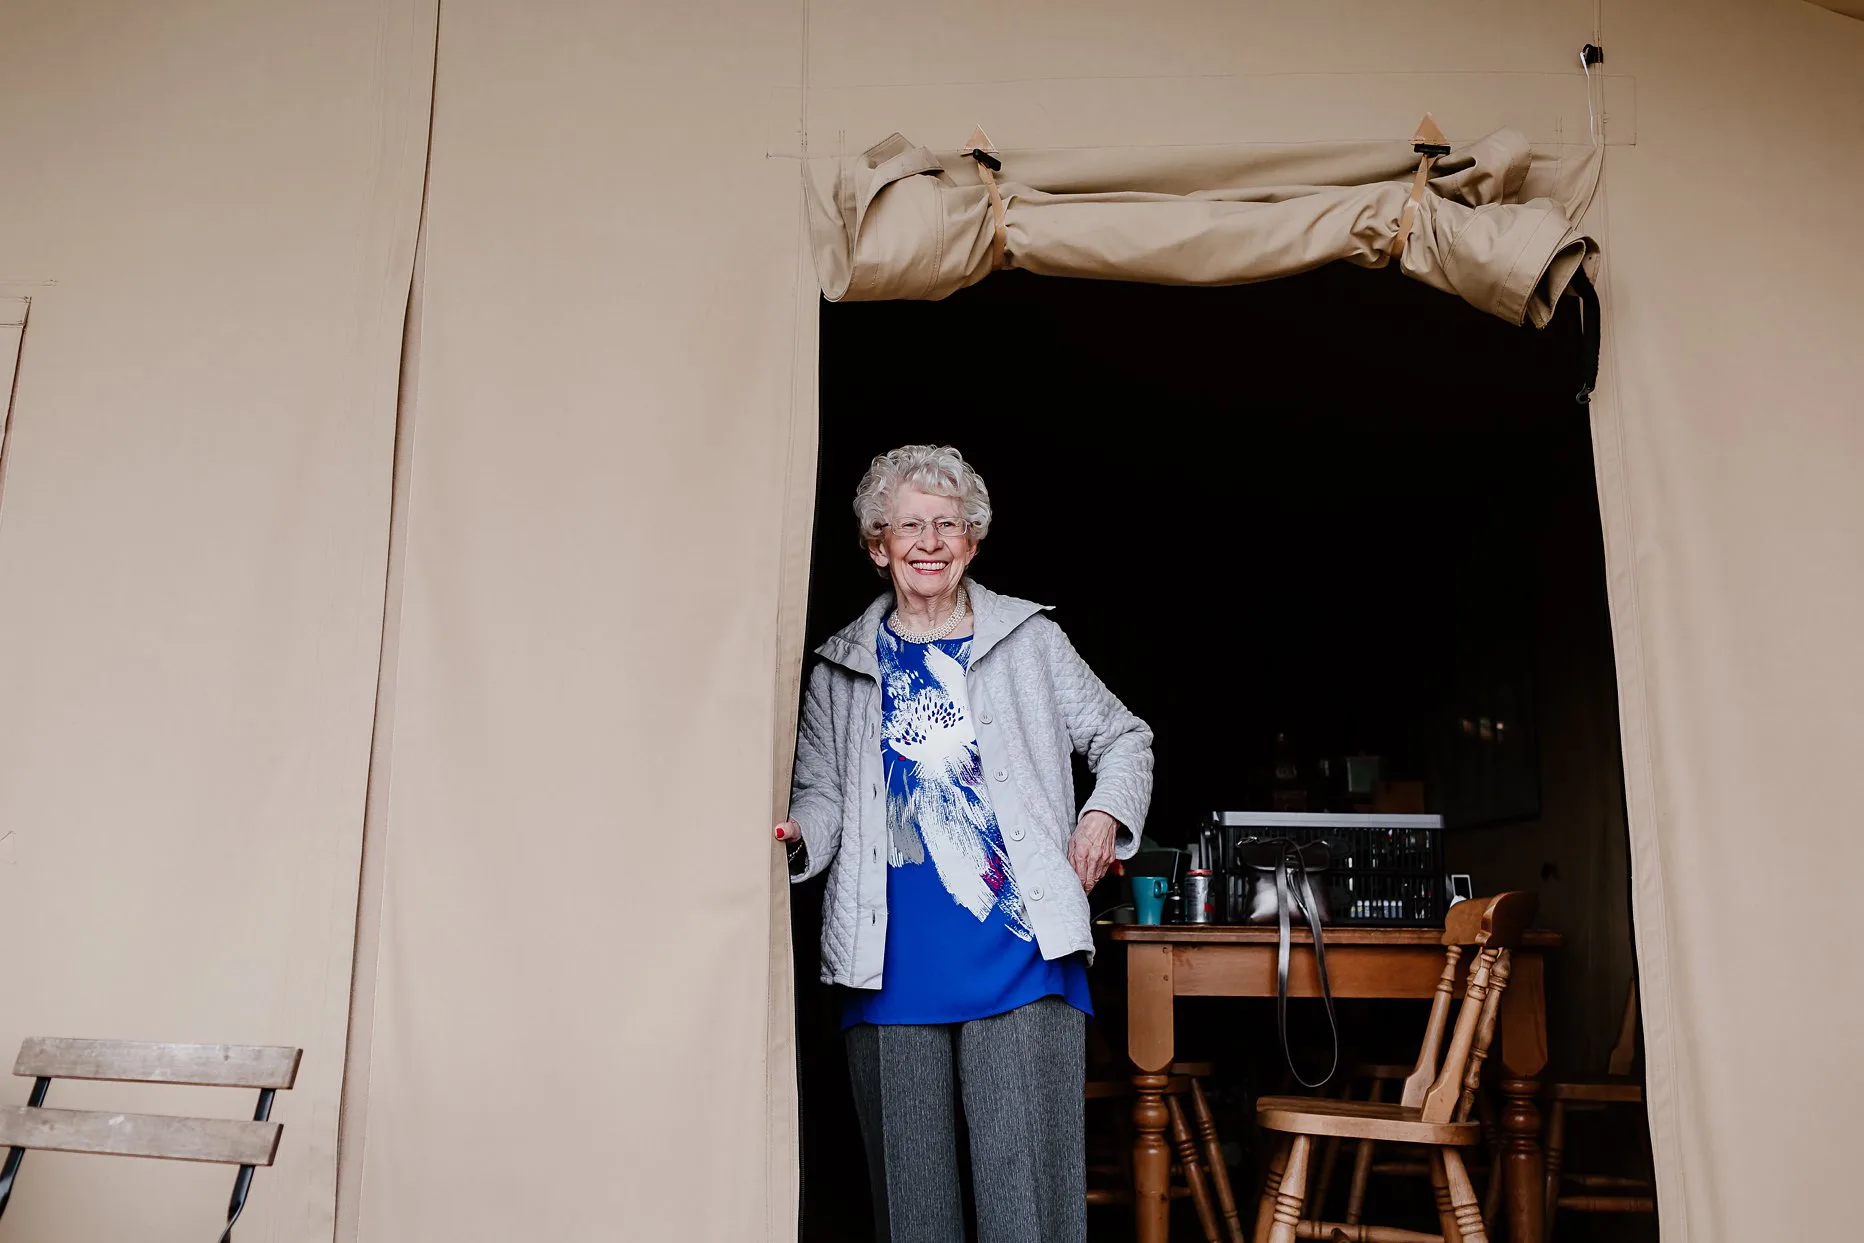 The brides grandma inside a glamping tent the morning of the wedding. She is smiling at the camera.